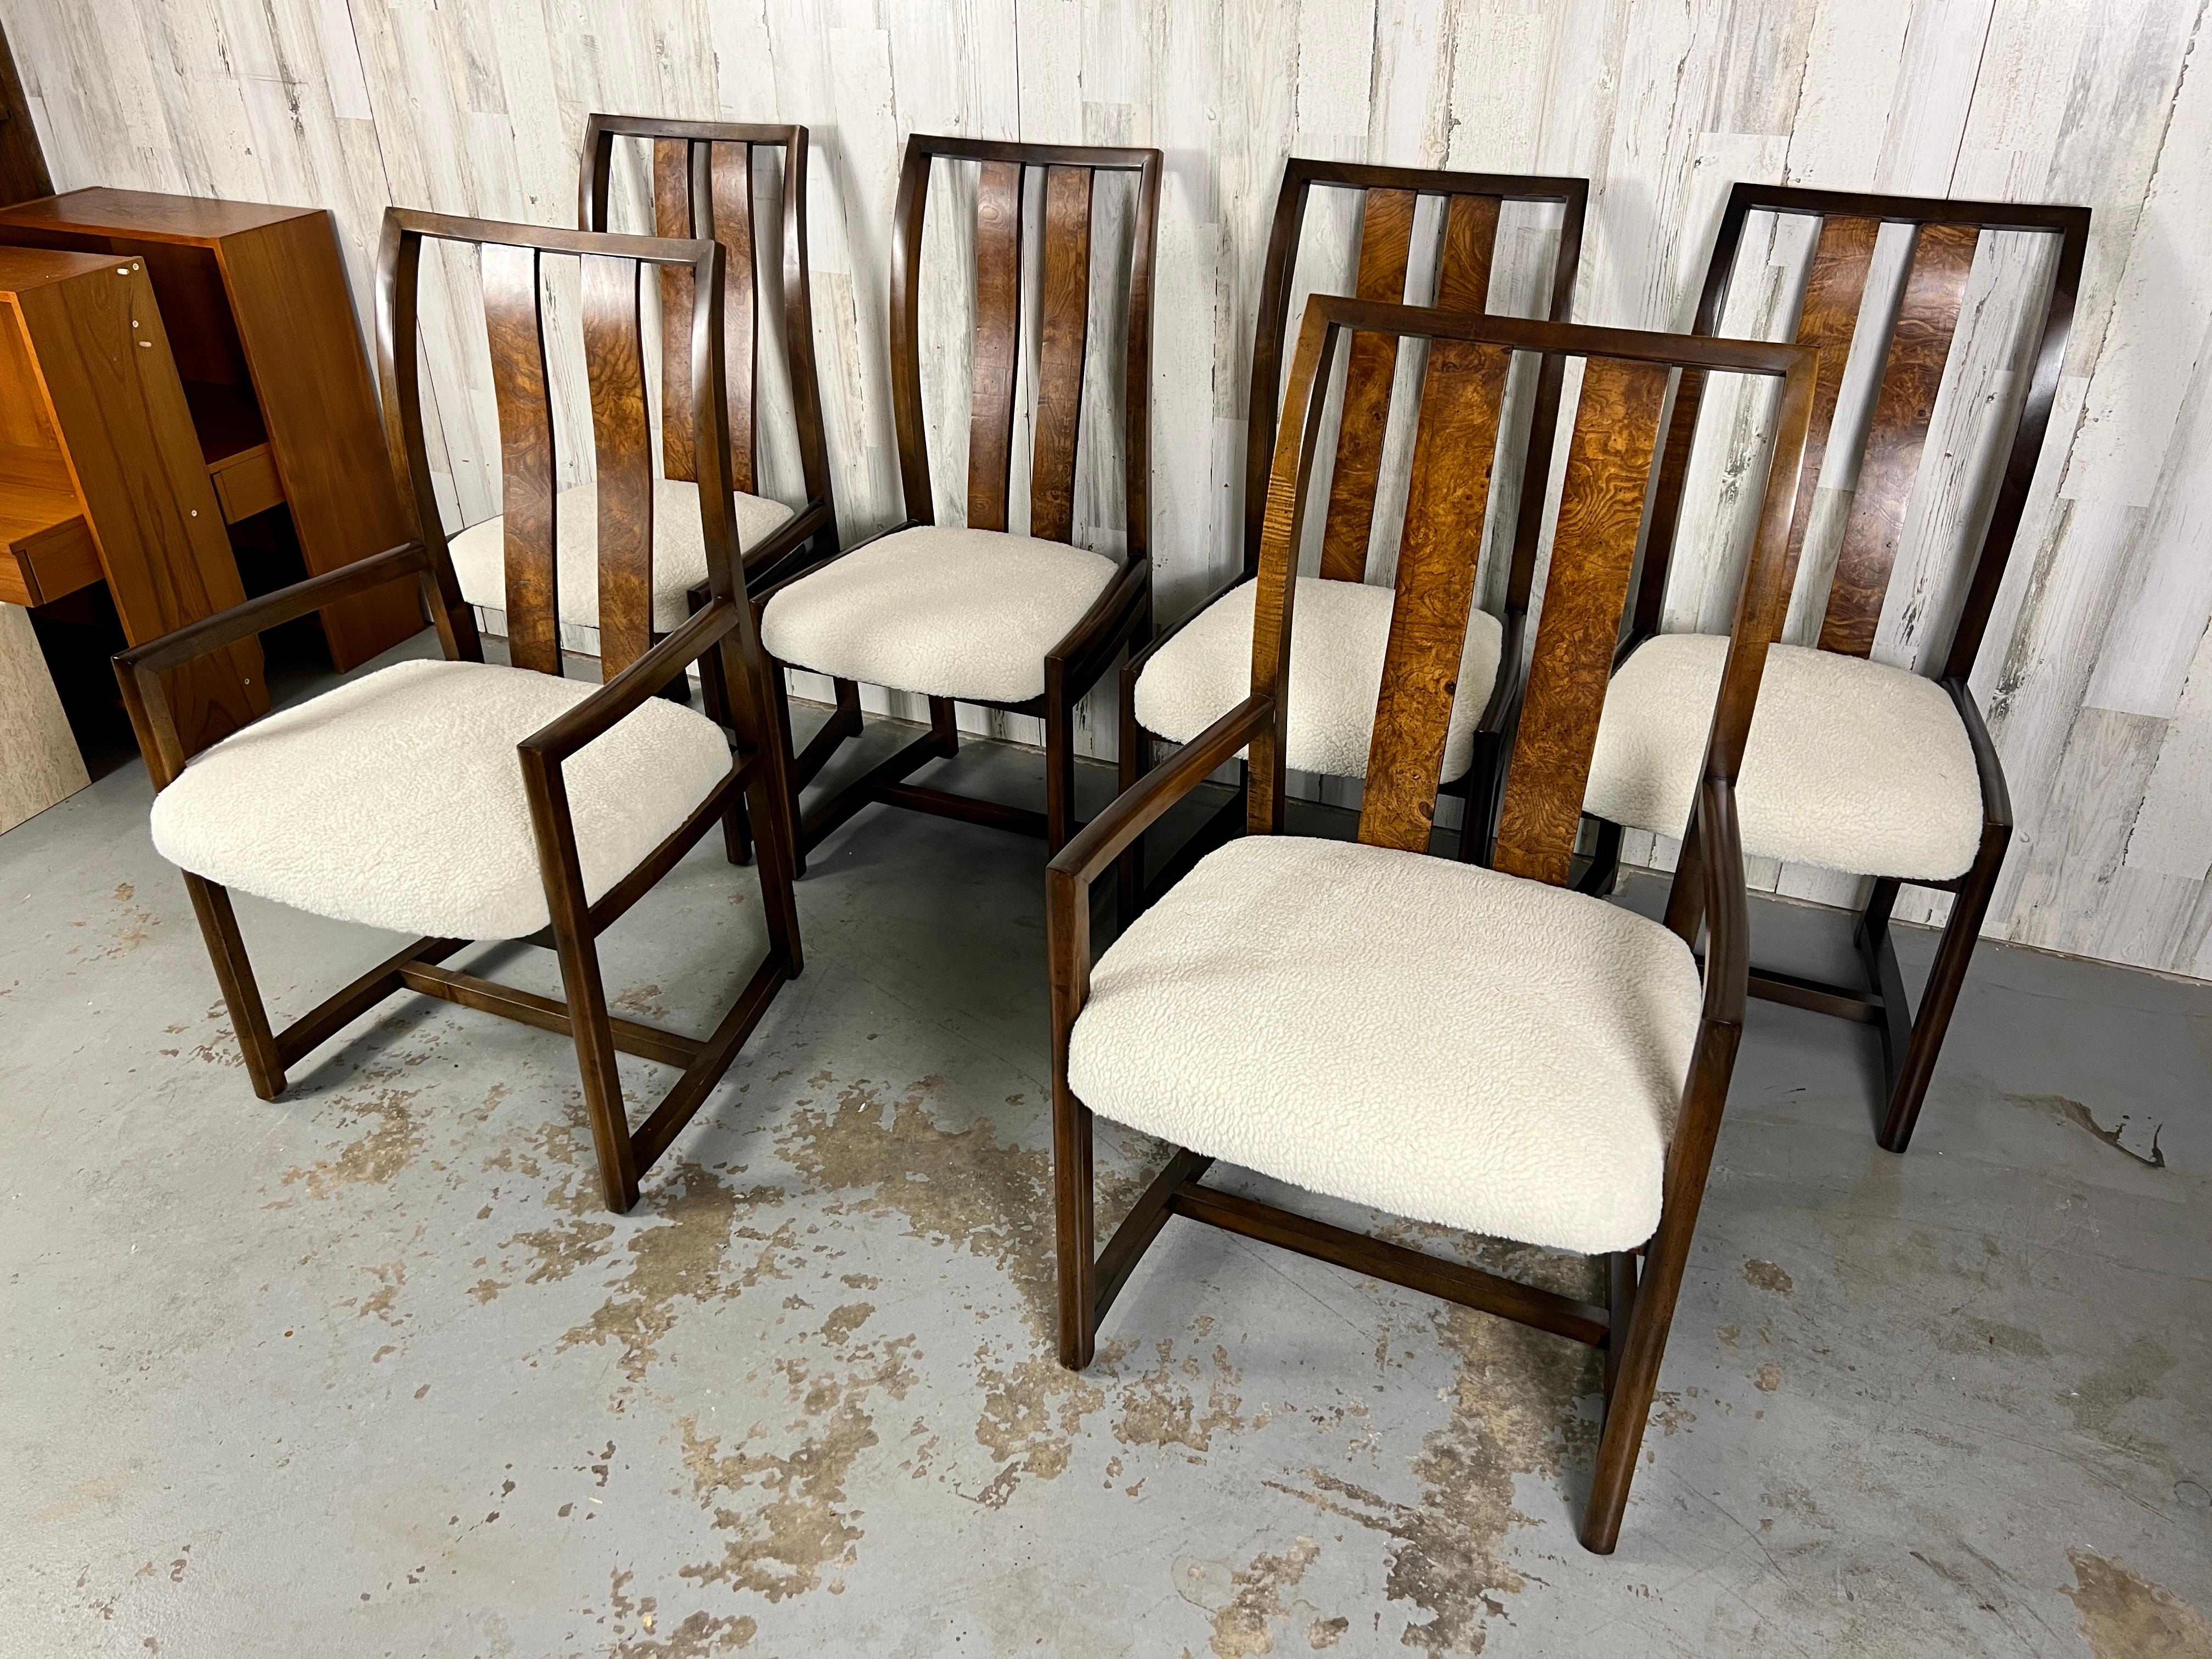 20th Century 1980s Modernist Dining Chairs with Burl Wood Back Splat For Sale